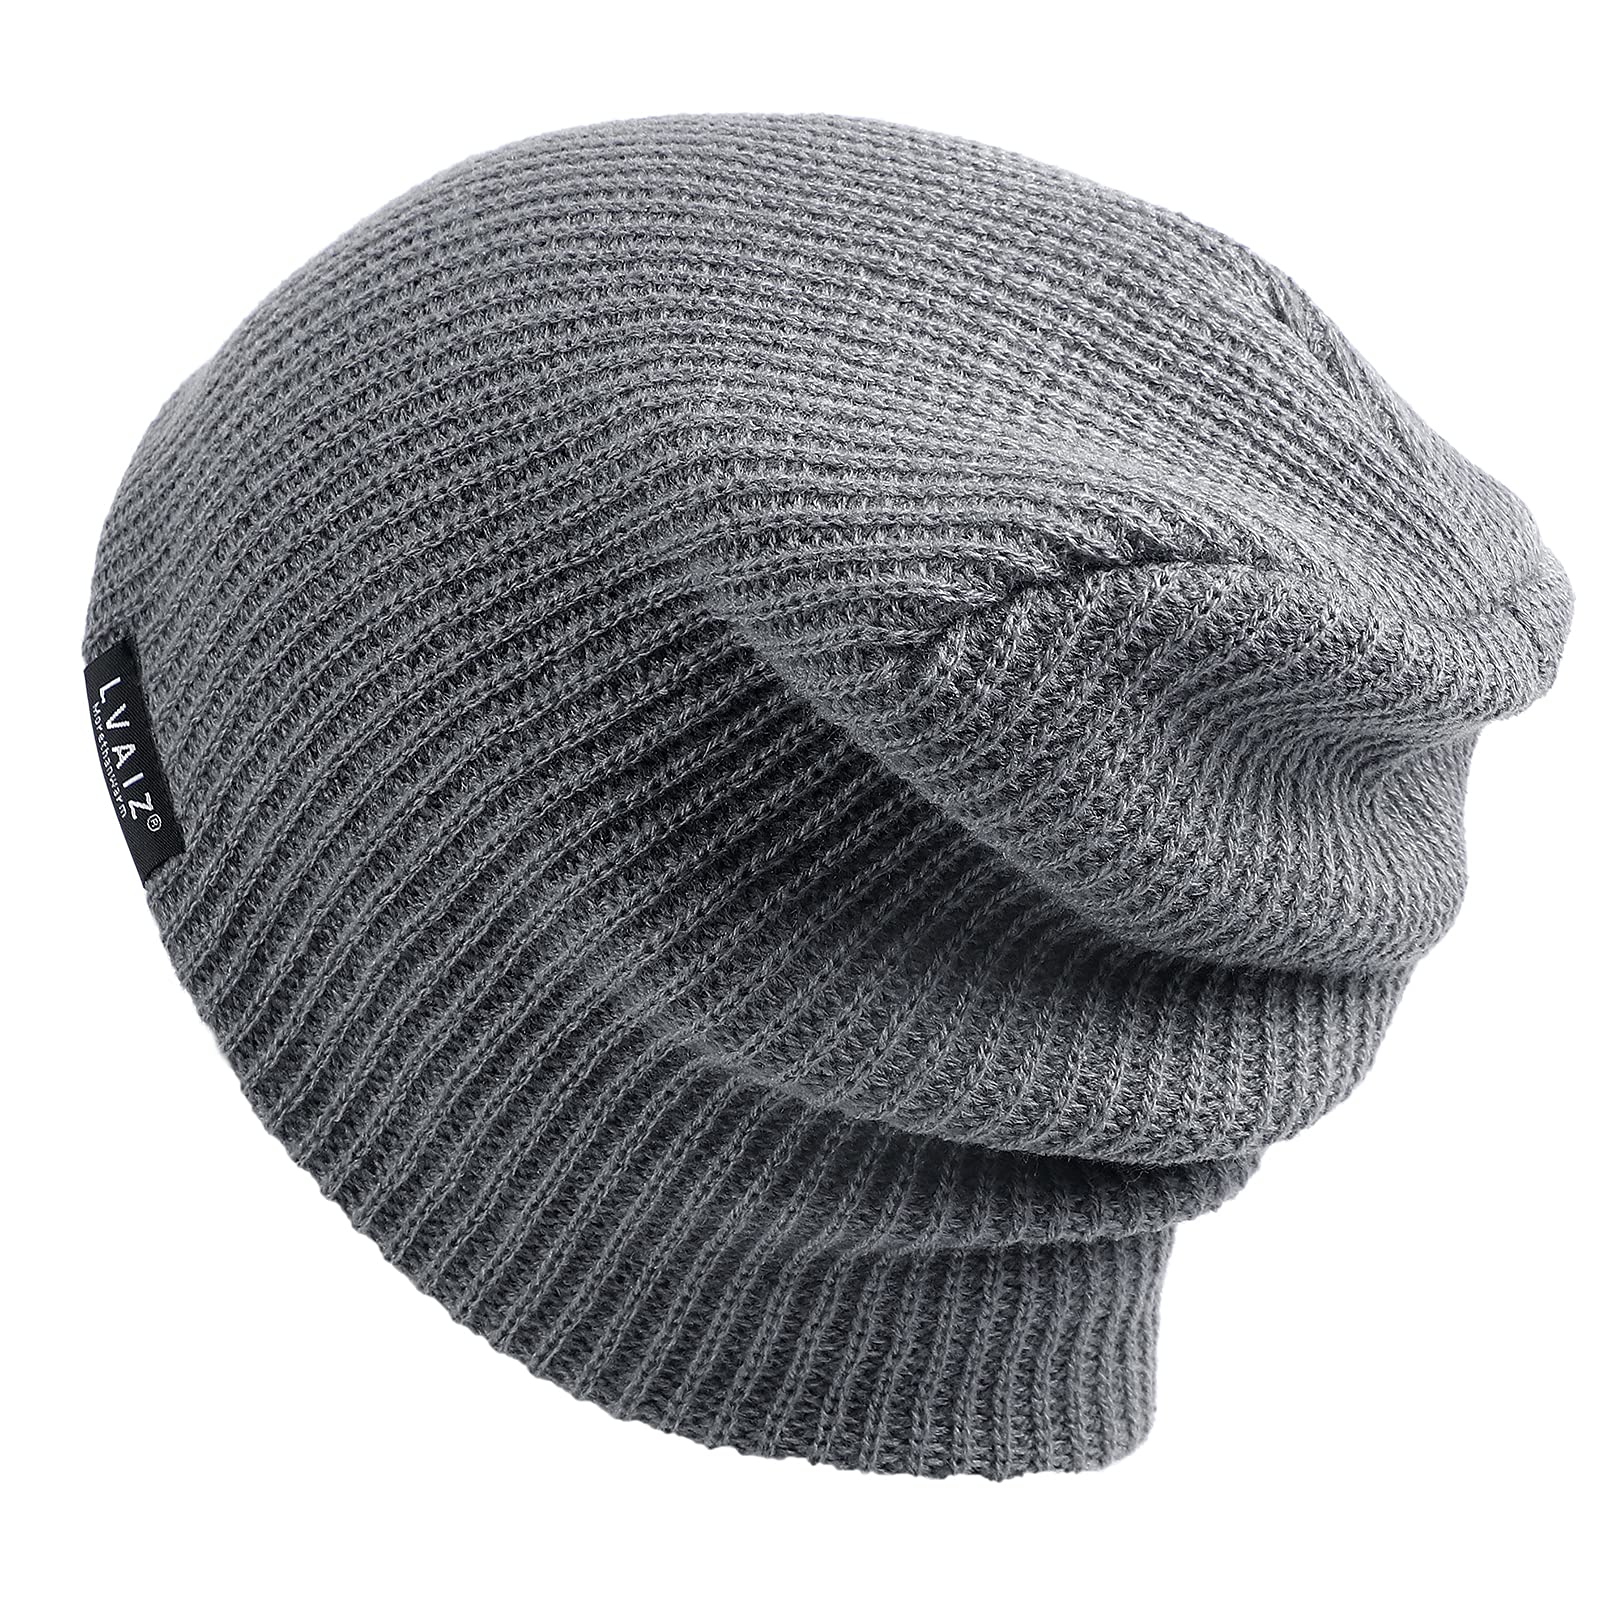 Sunny on X: A stretchy, comfortable, warm Louis Vuitton/Supreme “dupe”.  This beanie looks great on the ski hill or just with causal attire.  (Search: Winter beanies @dhgate). #dupe #fake #lv #louisvuitton #supreme #